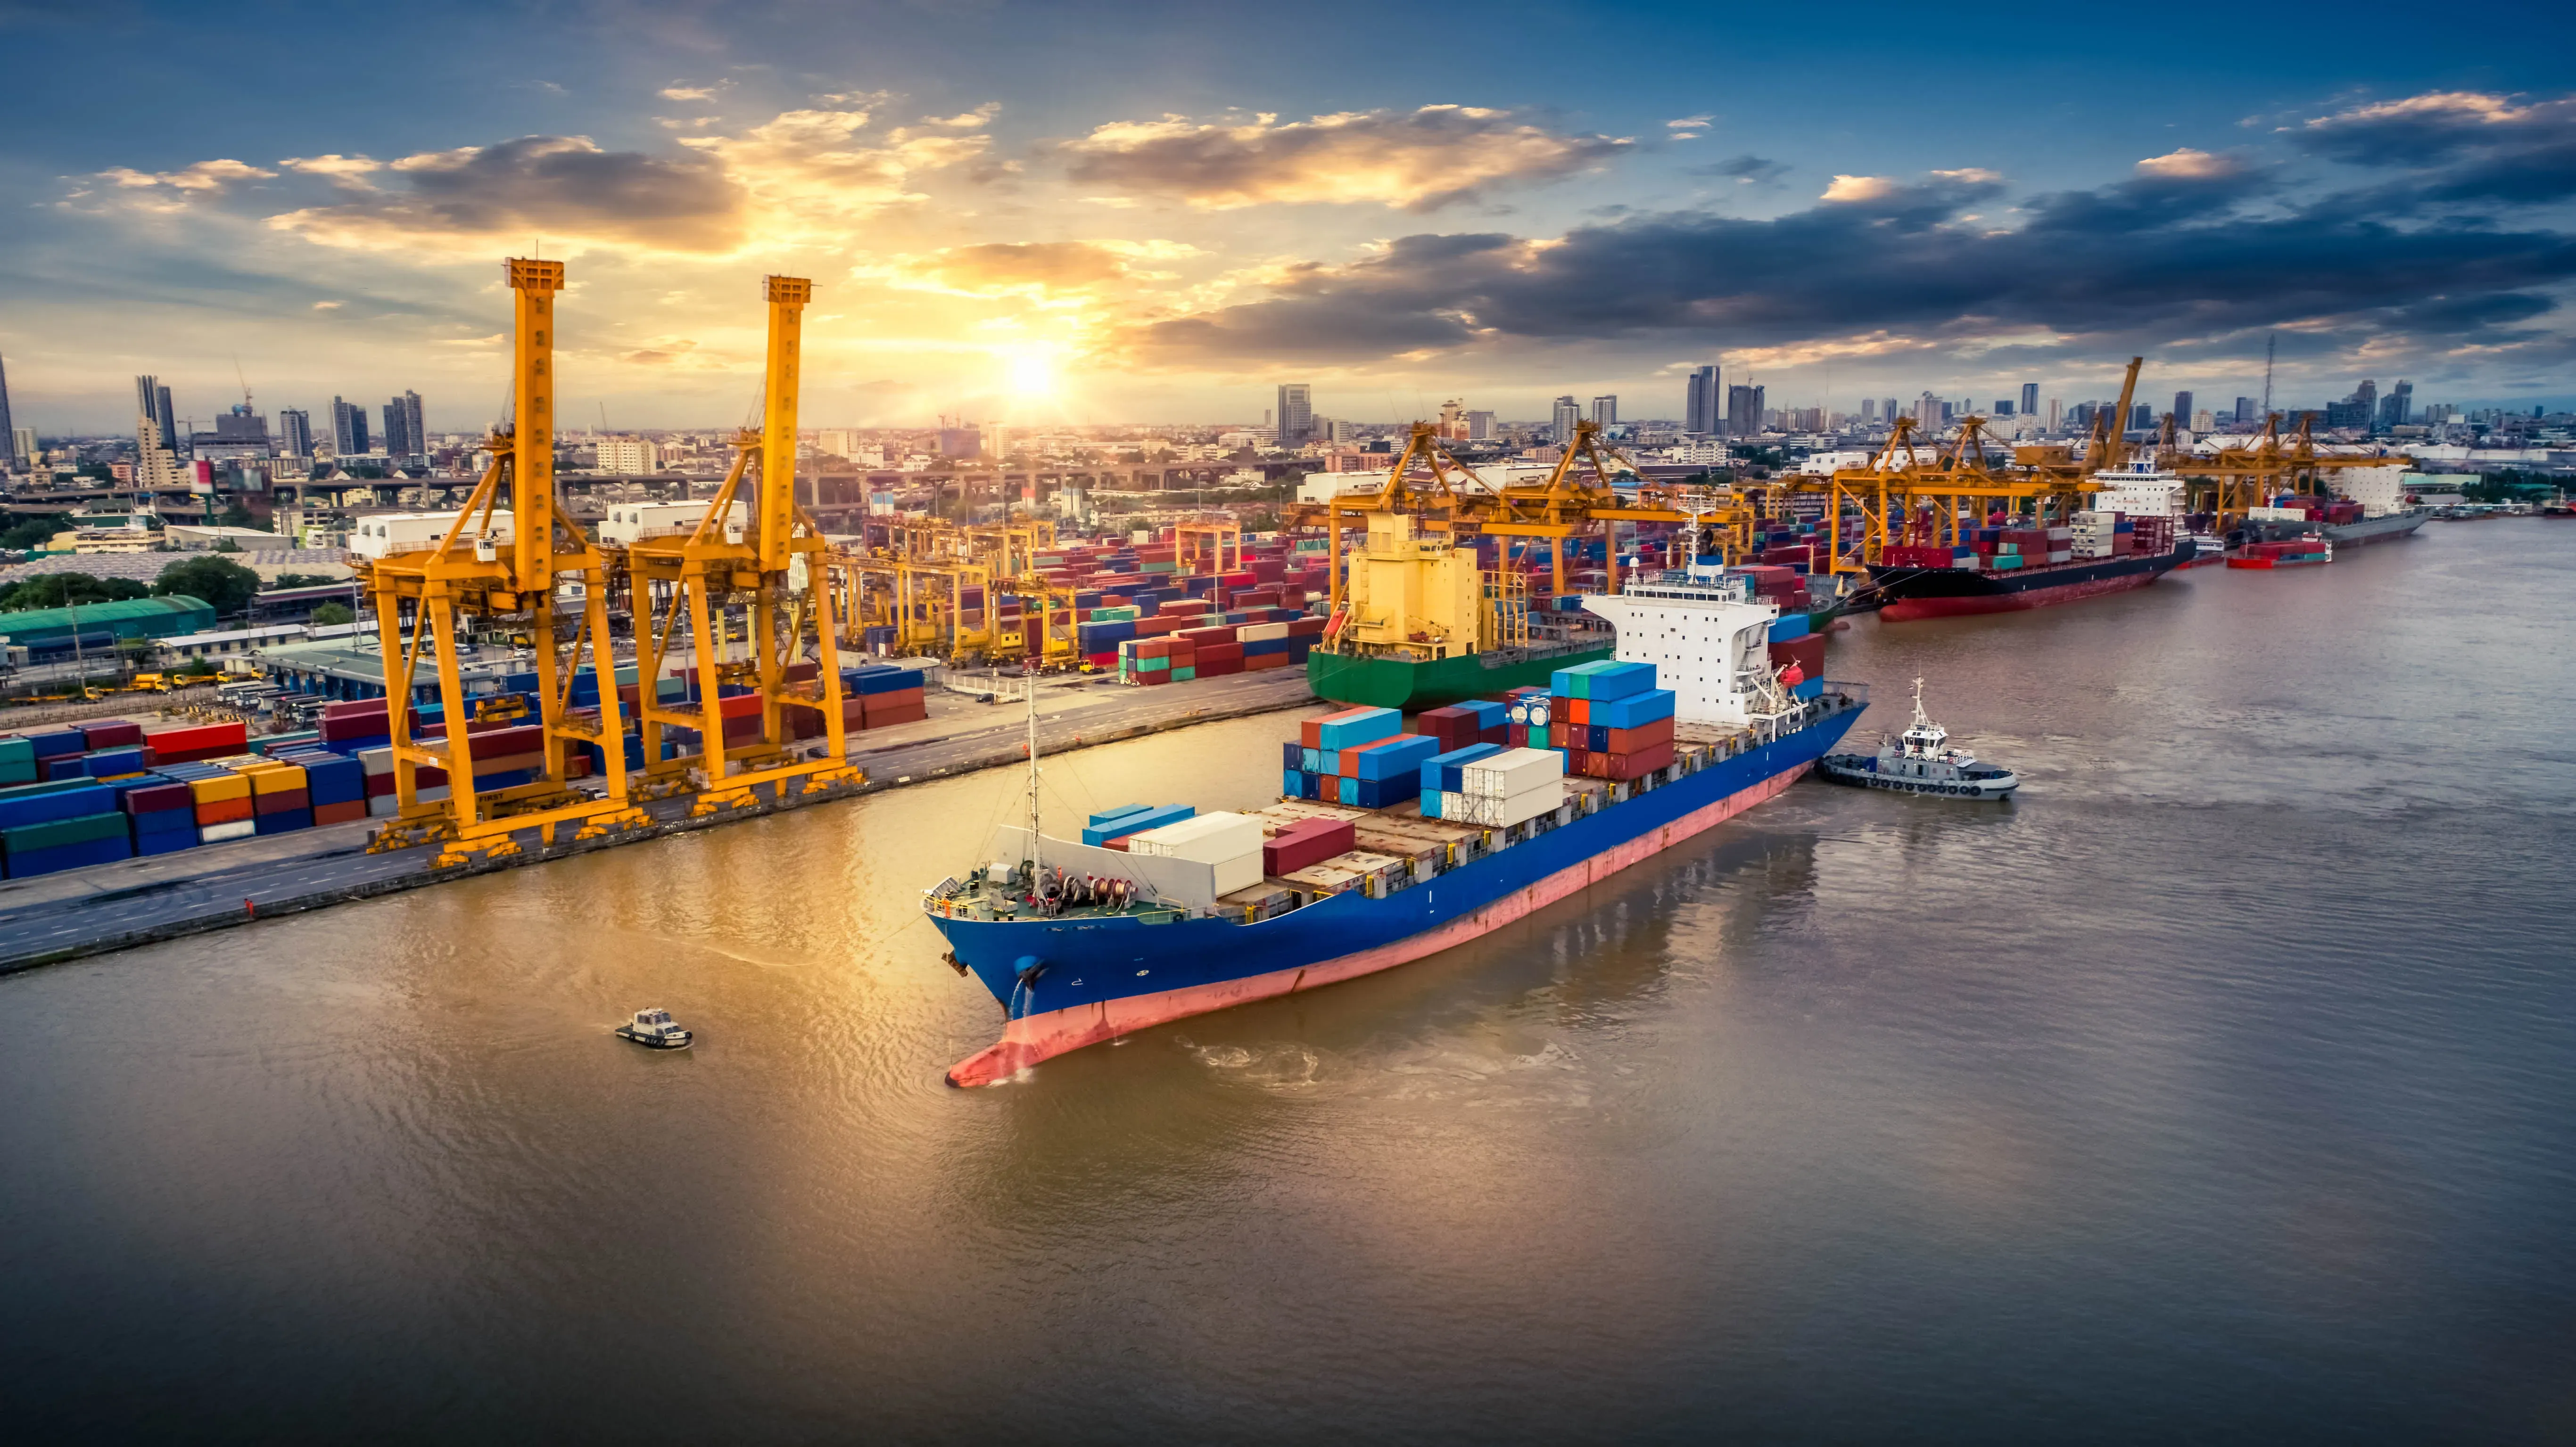 How IoT Can Help Overcome COVID-19 Supply Chain Disruptions